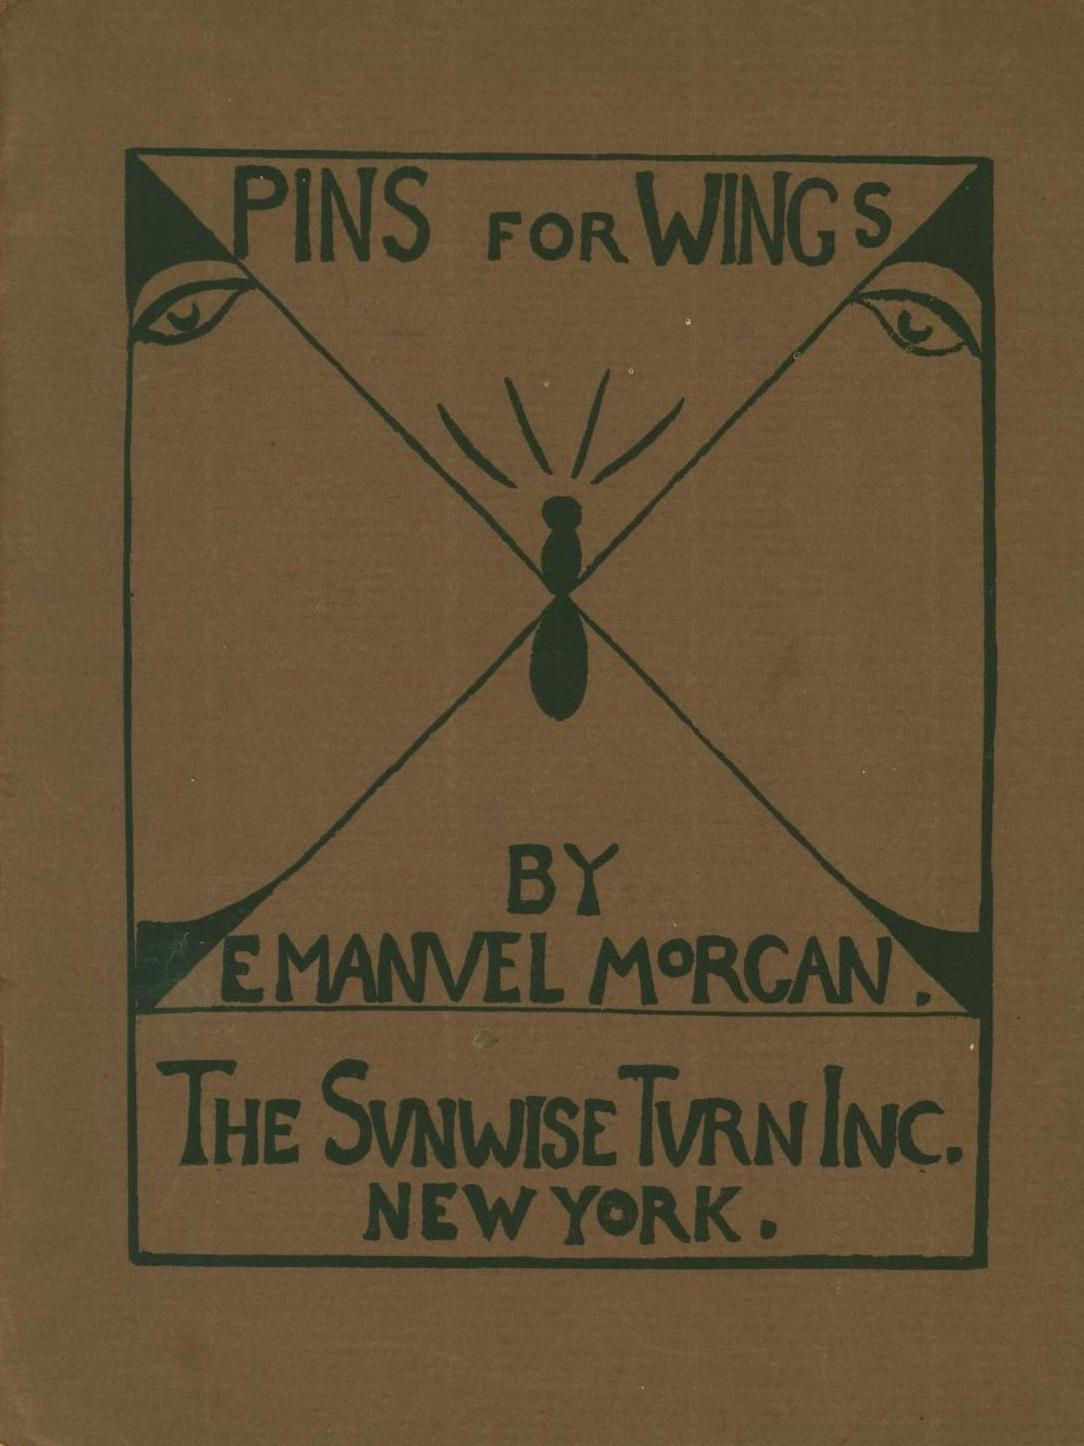 Witter Bynner (Emmanuel Morgan), Pins for Wings, Caricatures by Ivan Opffer and William Saphier, New York: The Sunrise Turn, Inc., 1920